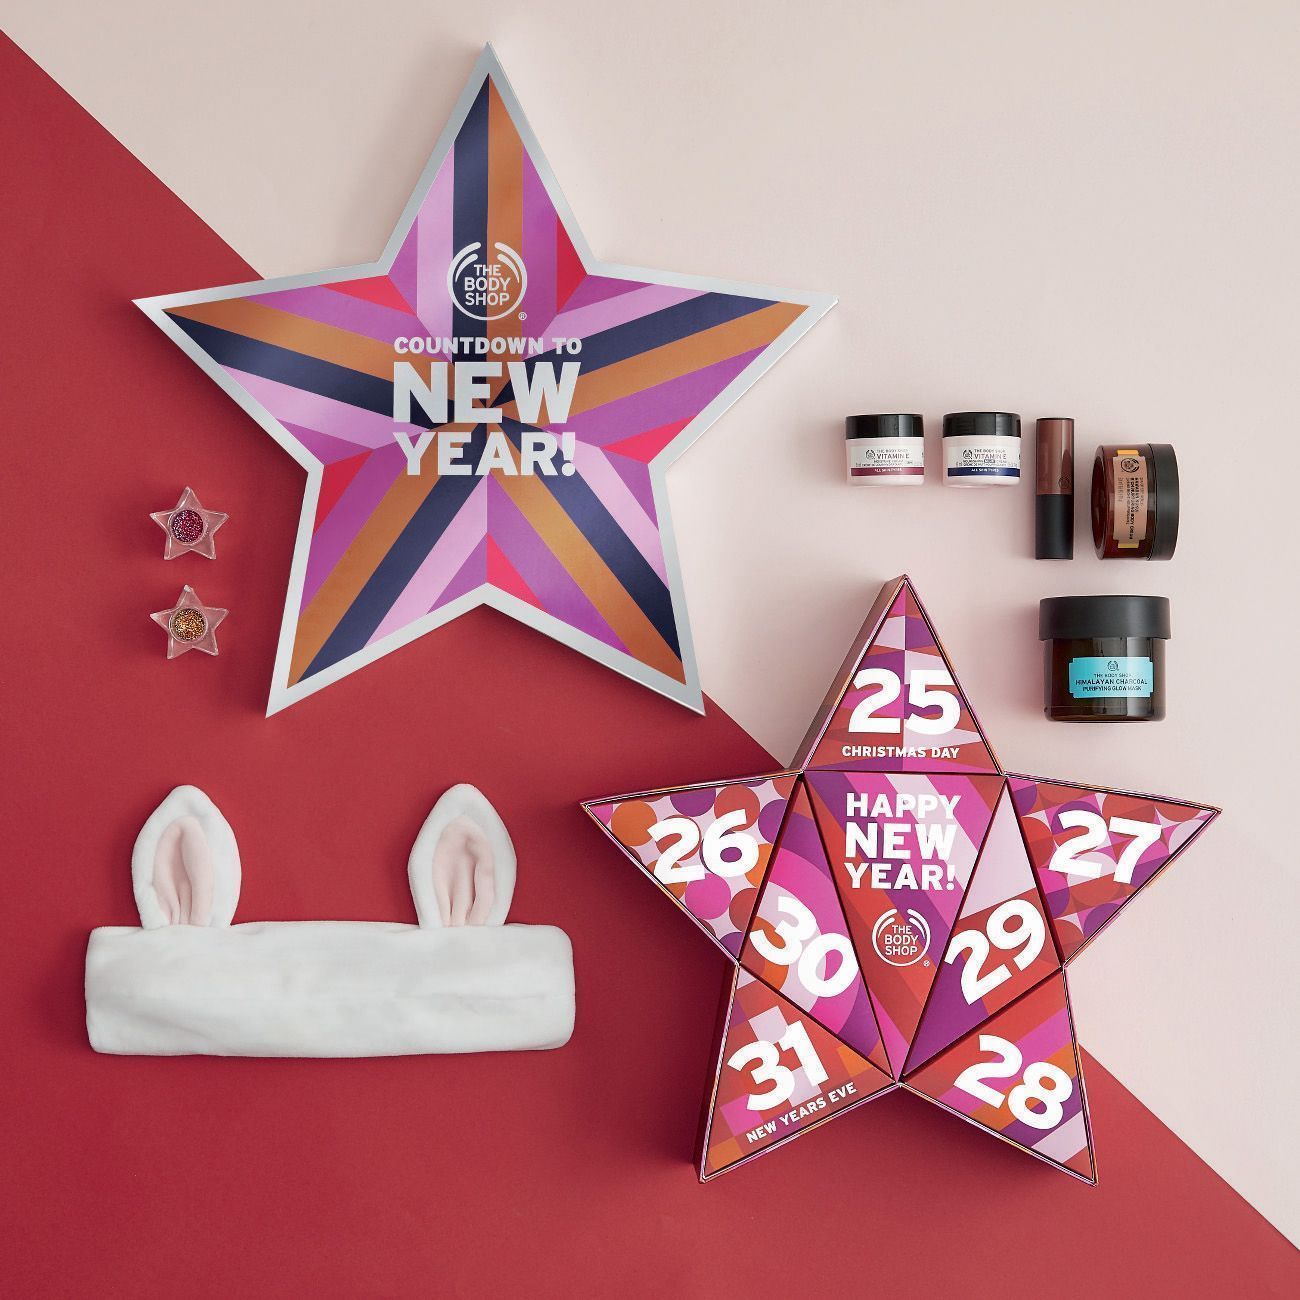 the body shop Countdown to New Year